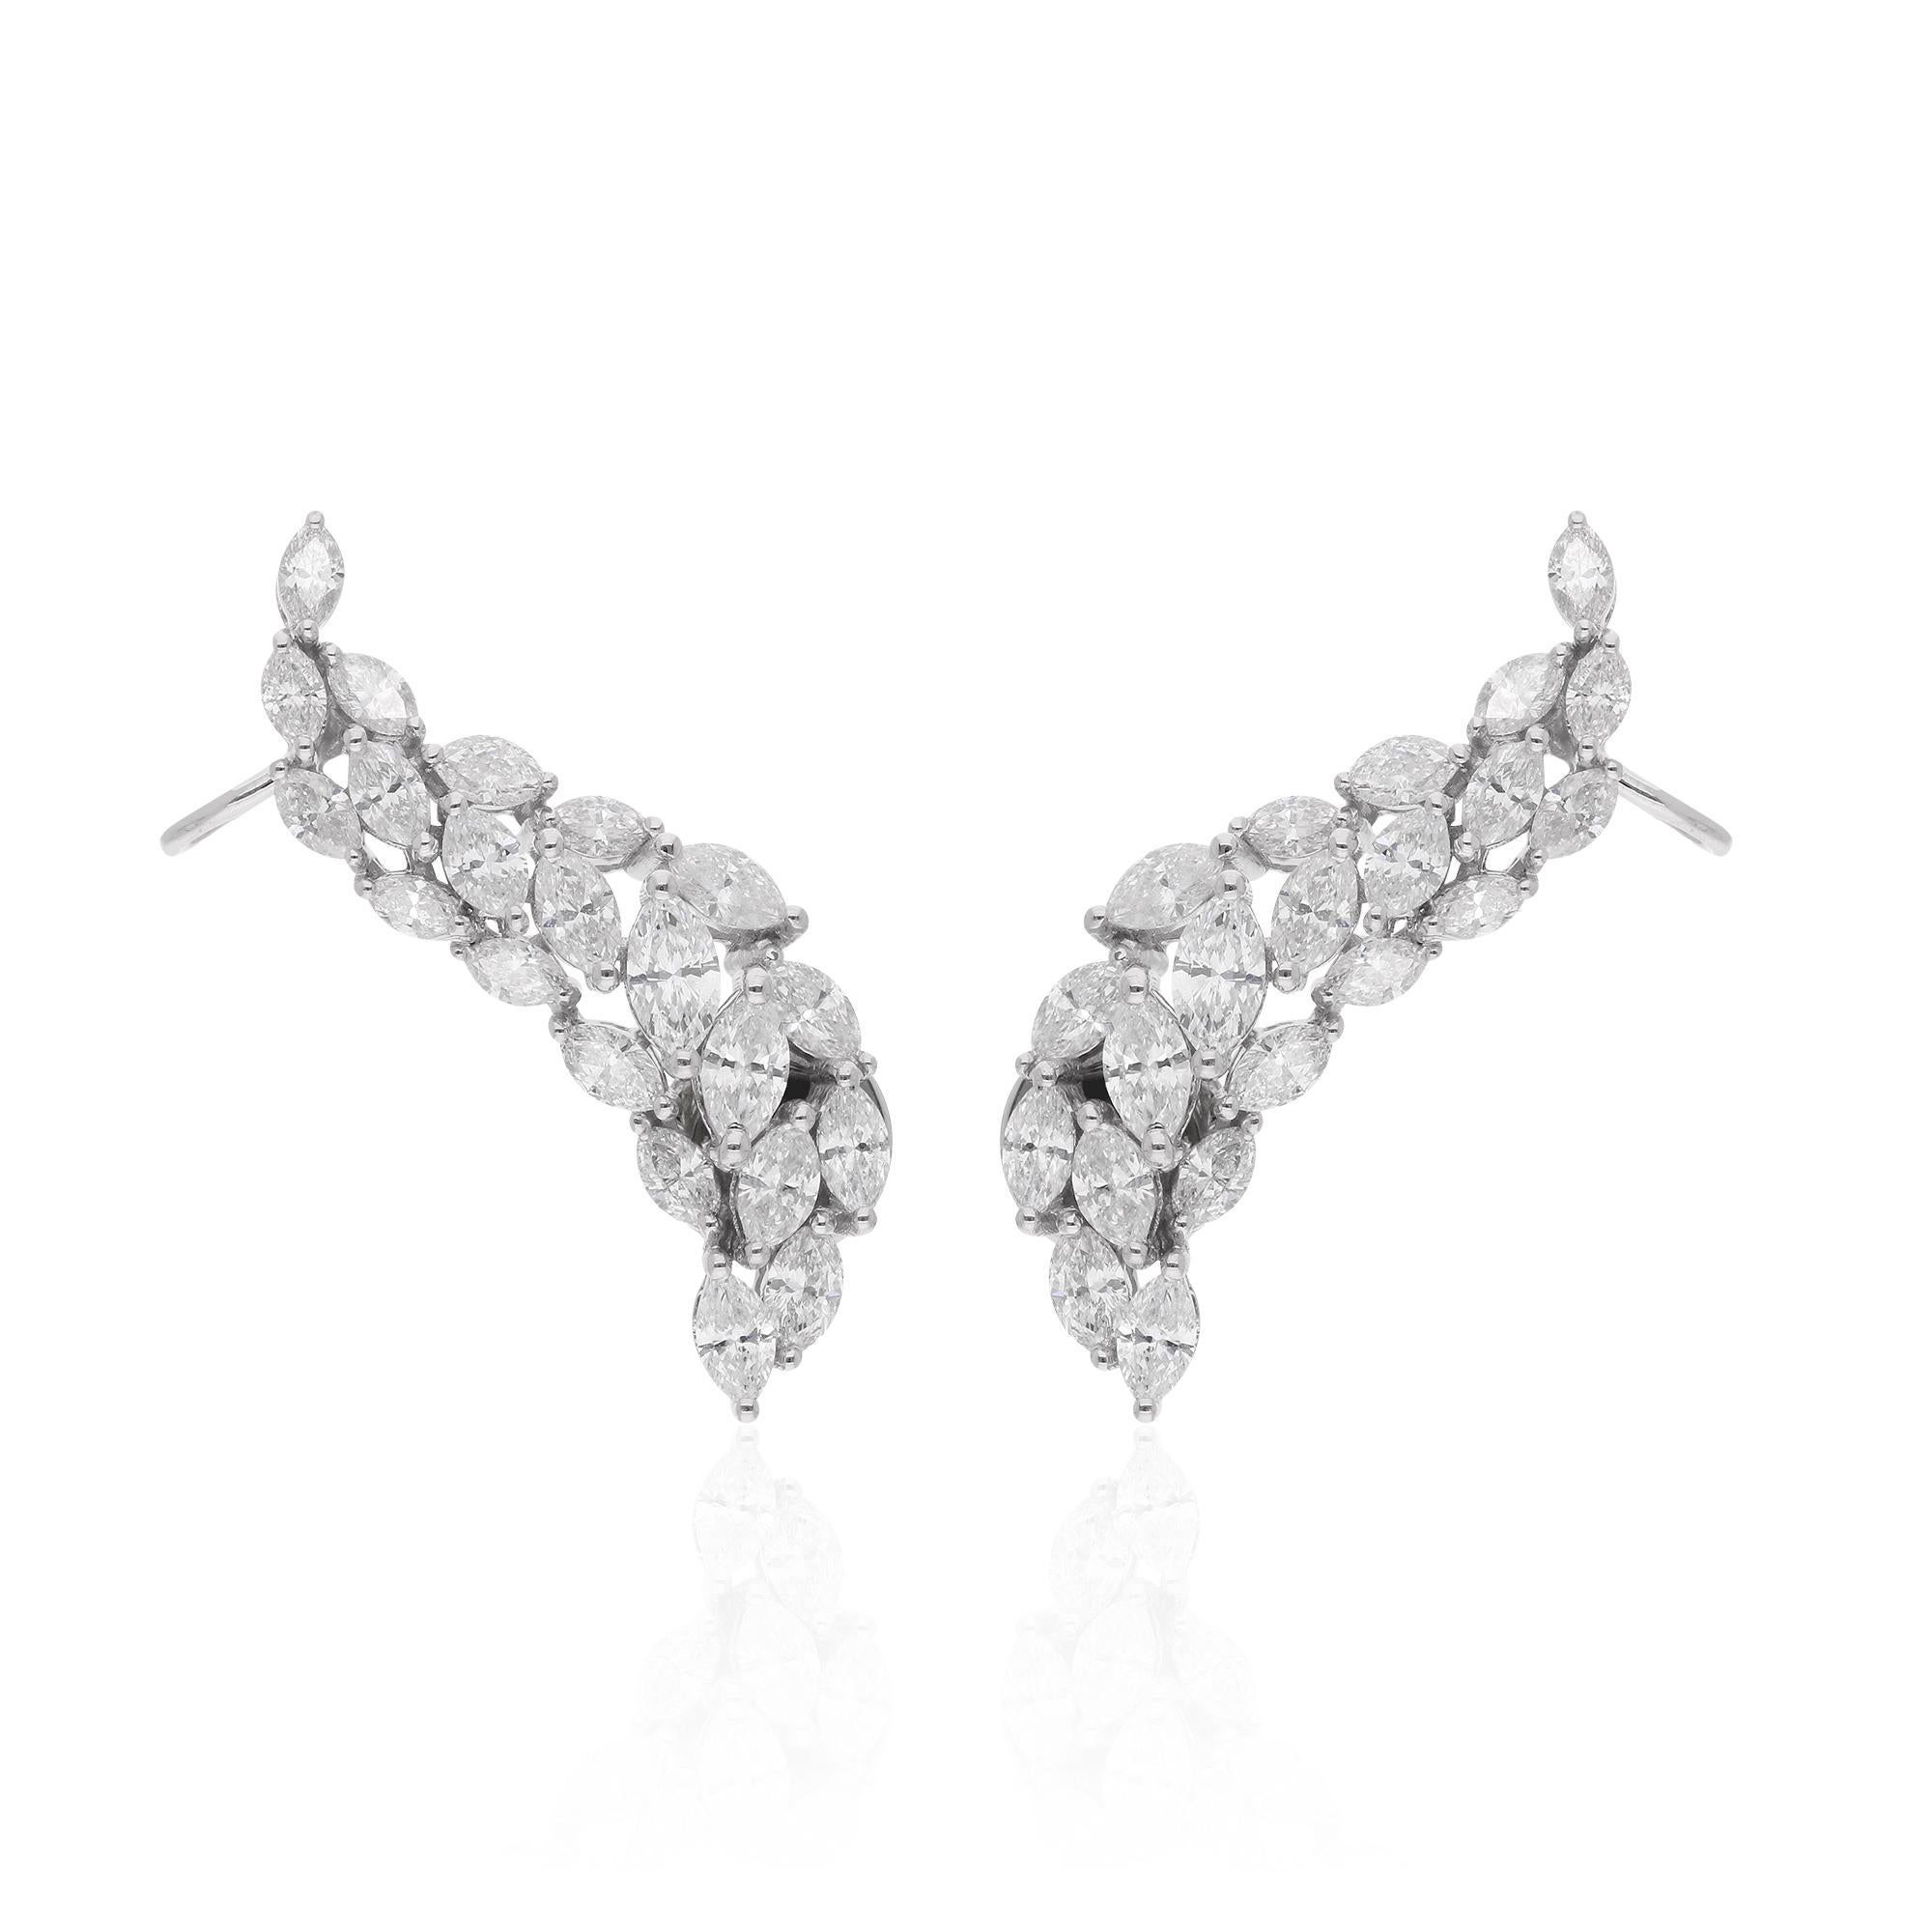 Crafted with precision and attention to detail, these earrings exemplify the highest standards of quality and craftsmanship. The lustrous 18 karat white gold setting provides the perfect backdrop for the dazzling marquise diamonds, ensuring they